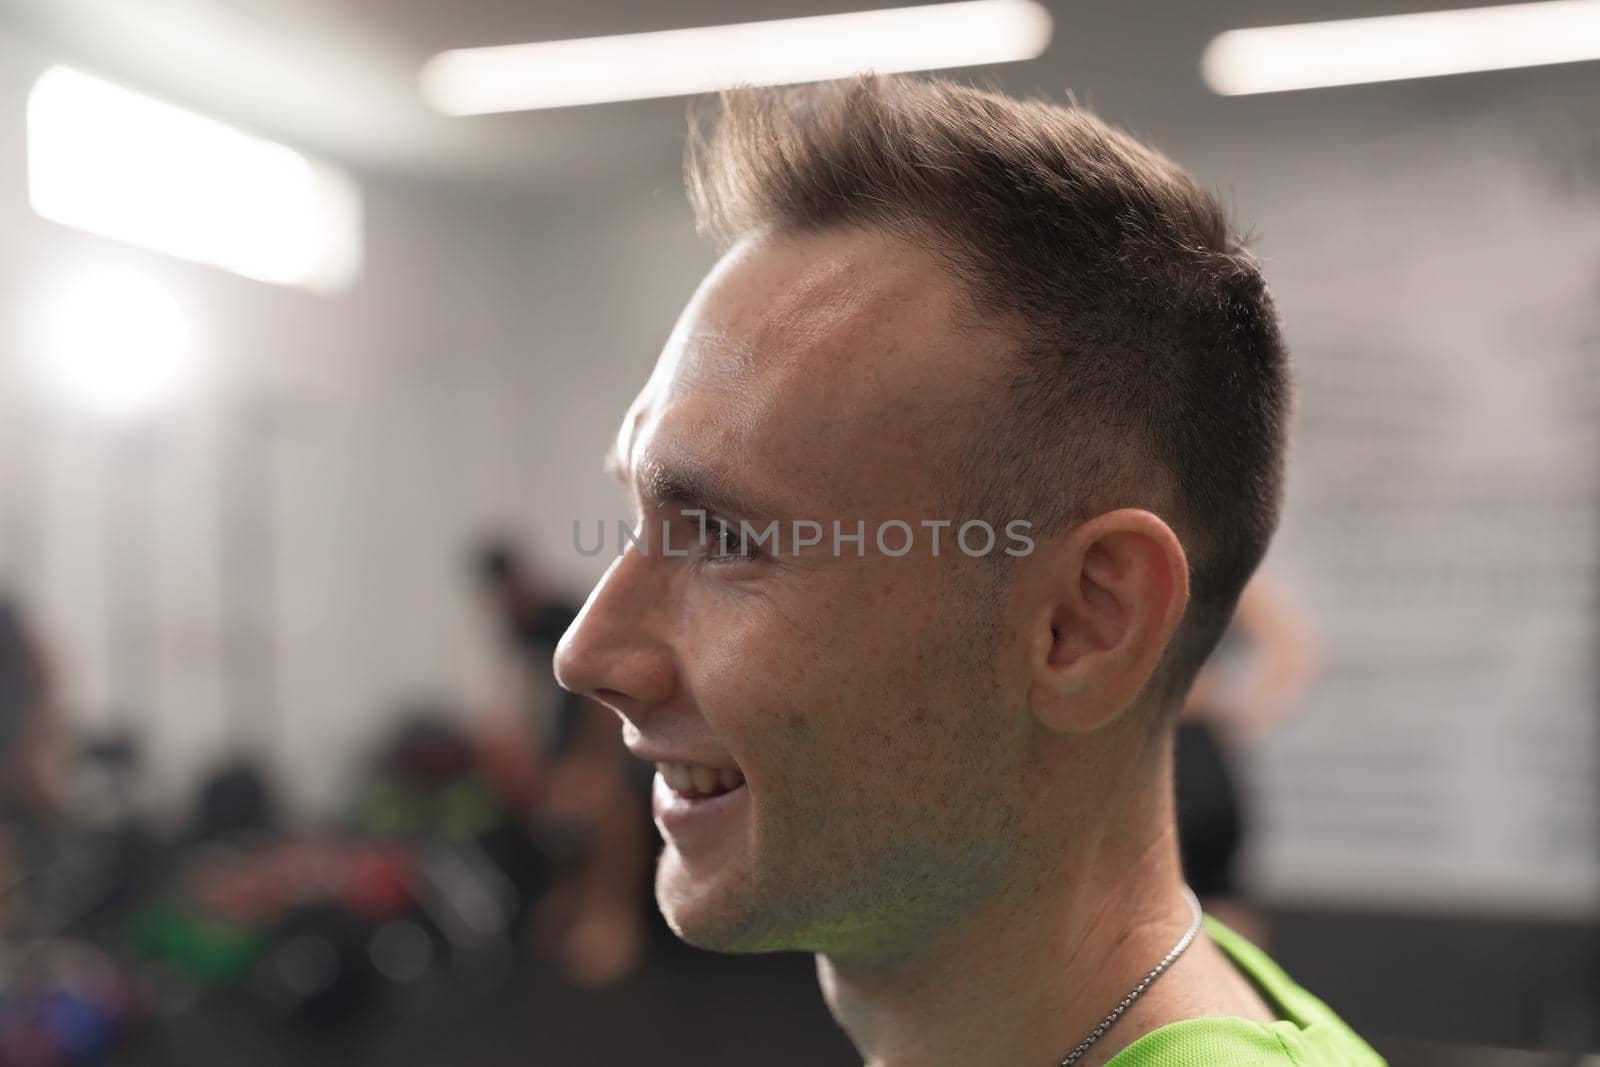 Portrait of a young man smiling during a training session at the local fitness center